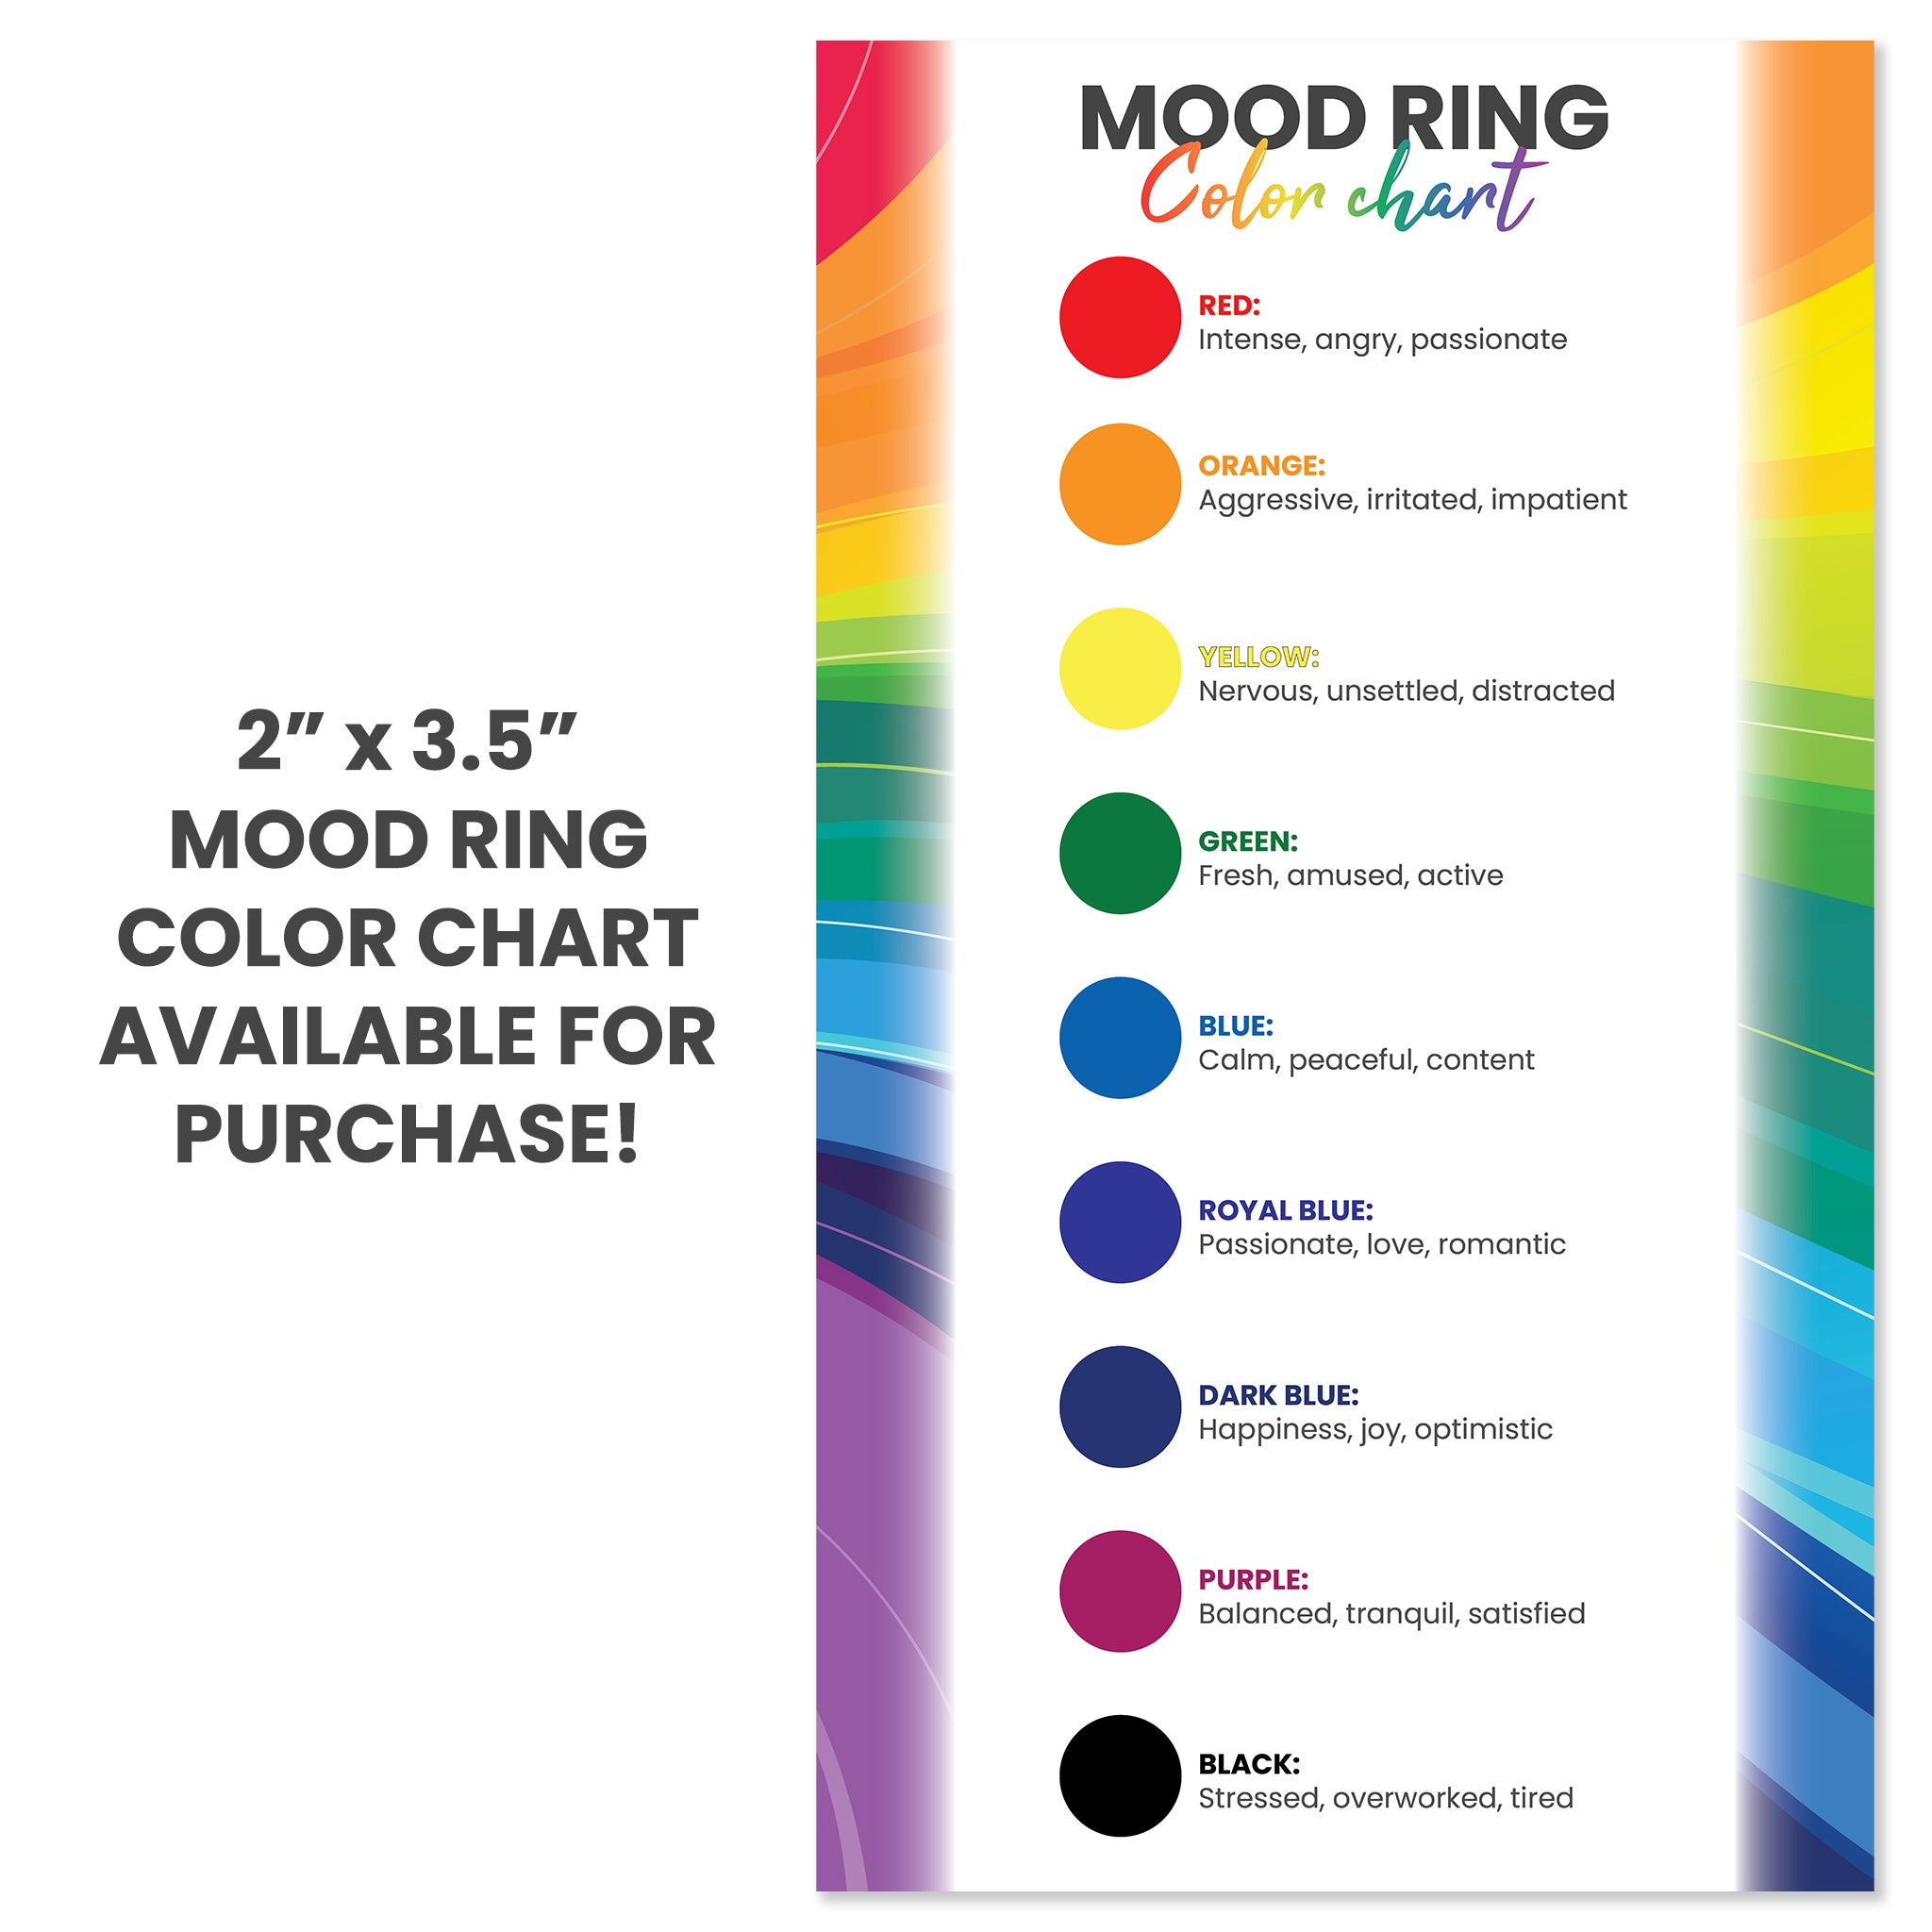 2 Pcs Mood Rings for Kids Men Women With Color Mood Chart Stainless Steel  Band Mood Jewelry Size 6 & 7|Amazon.com